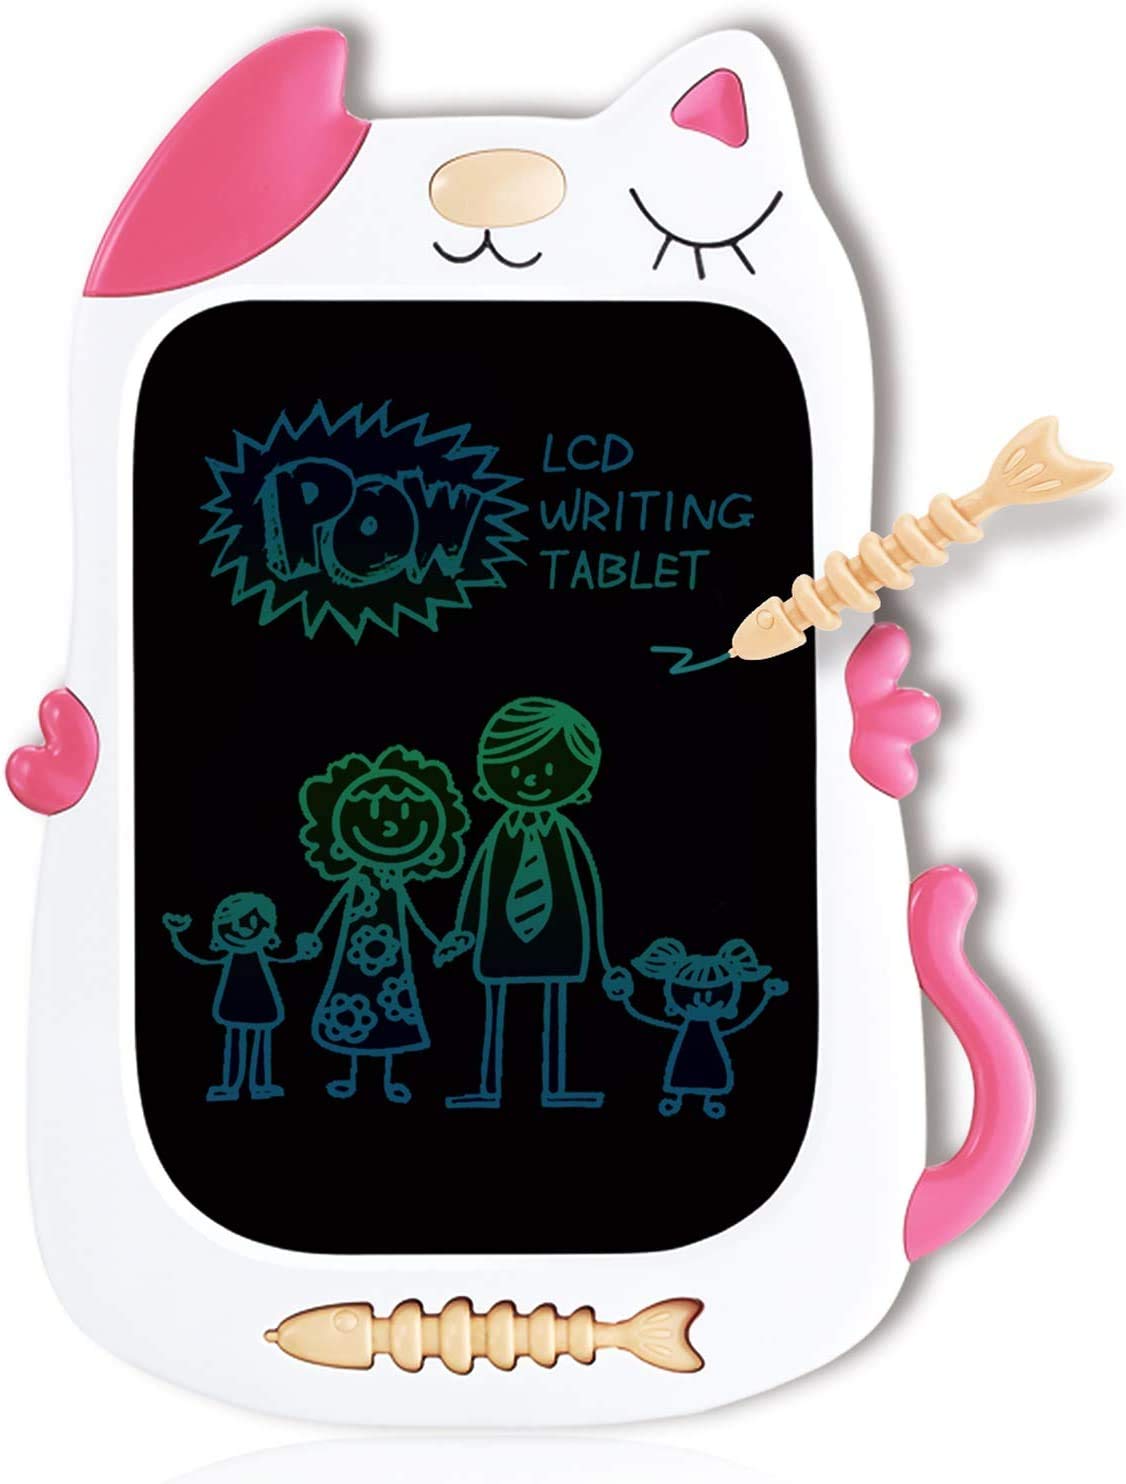 GJZZ LCD Drawing Doodle Board for 3-7 Year Old Girls Gifts,Writing and Learning Scribble Board for Little Kids - Pink White